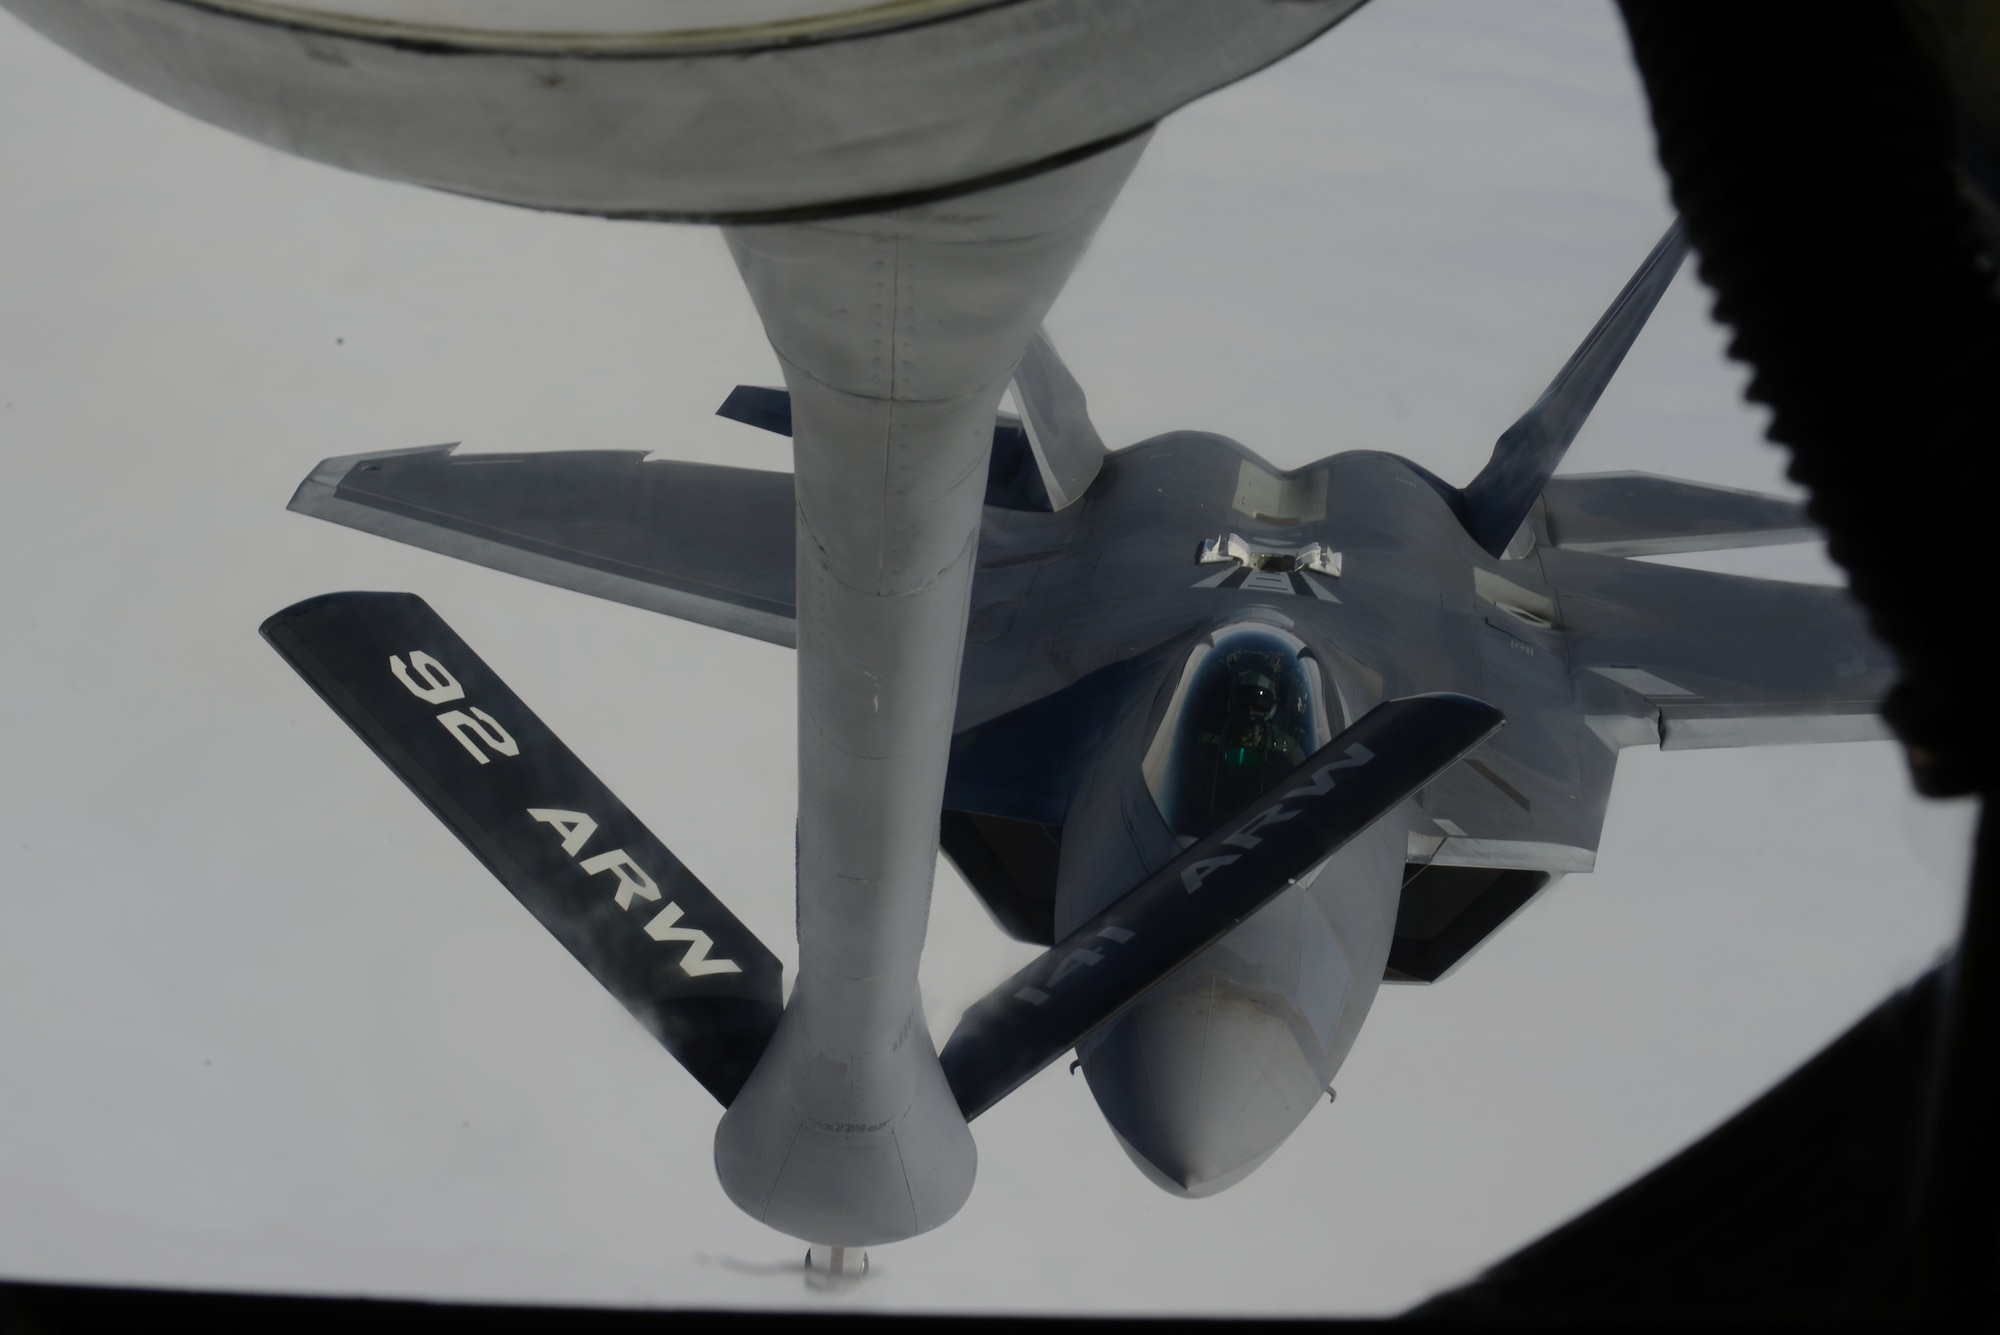 An F-22 Raptor from the 1st Fighter Wing, Joint Base Langley-Eustis, Va., prepares to refuel from a KC-135 Stratotanker from the 93rd Air Refueling Squadron from Fairchild Air Force Base, Wash., during Red Flag 14-1 at Nellis AFB, Nev., Feb. 6, 2014. Flying units from around the Department of Defense deploy to Nellis AFB to participate in Red Flag exercises that are typically held three times a year and organized by the 414th Combat Training Squadron. (U.S. Air Force photo by Senior Airman Benjamin Sutton/Released) 